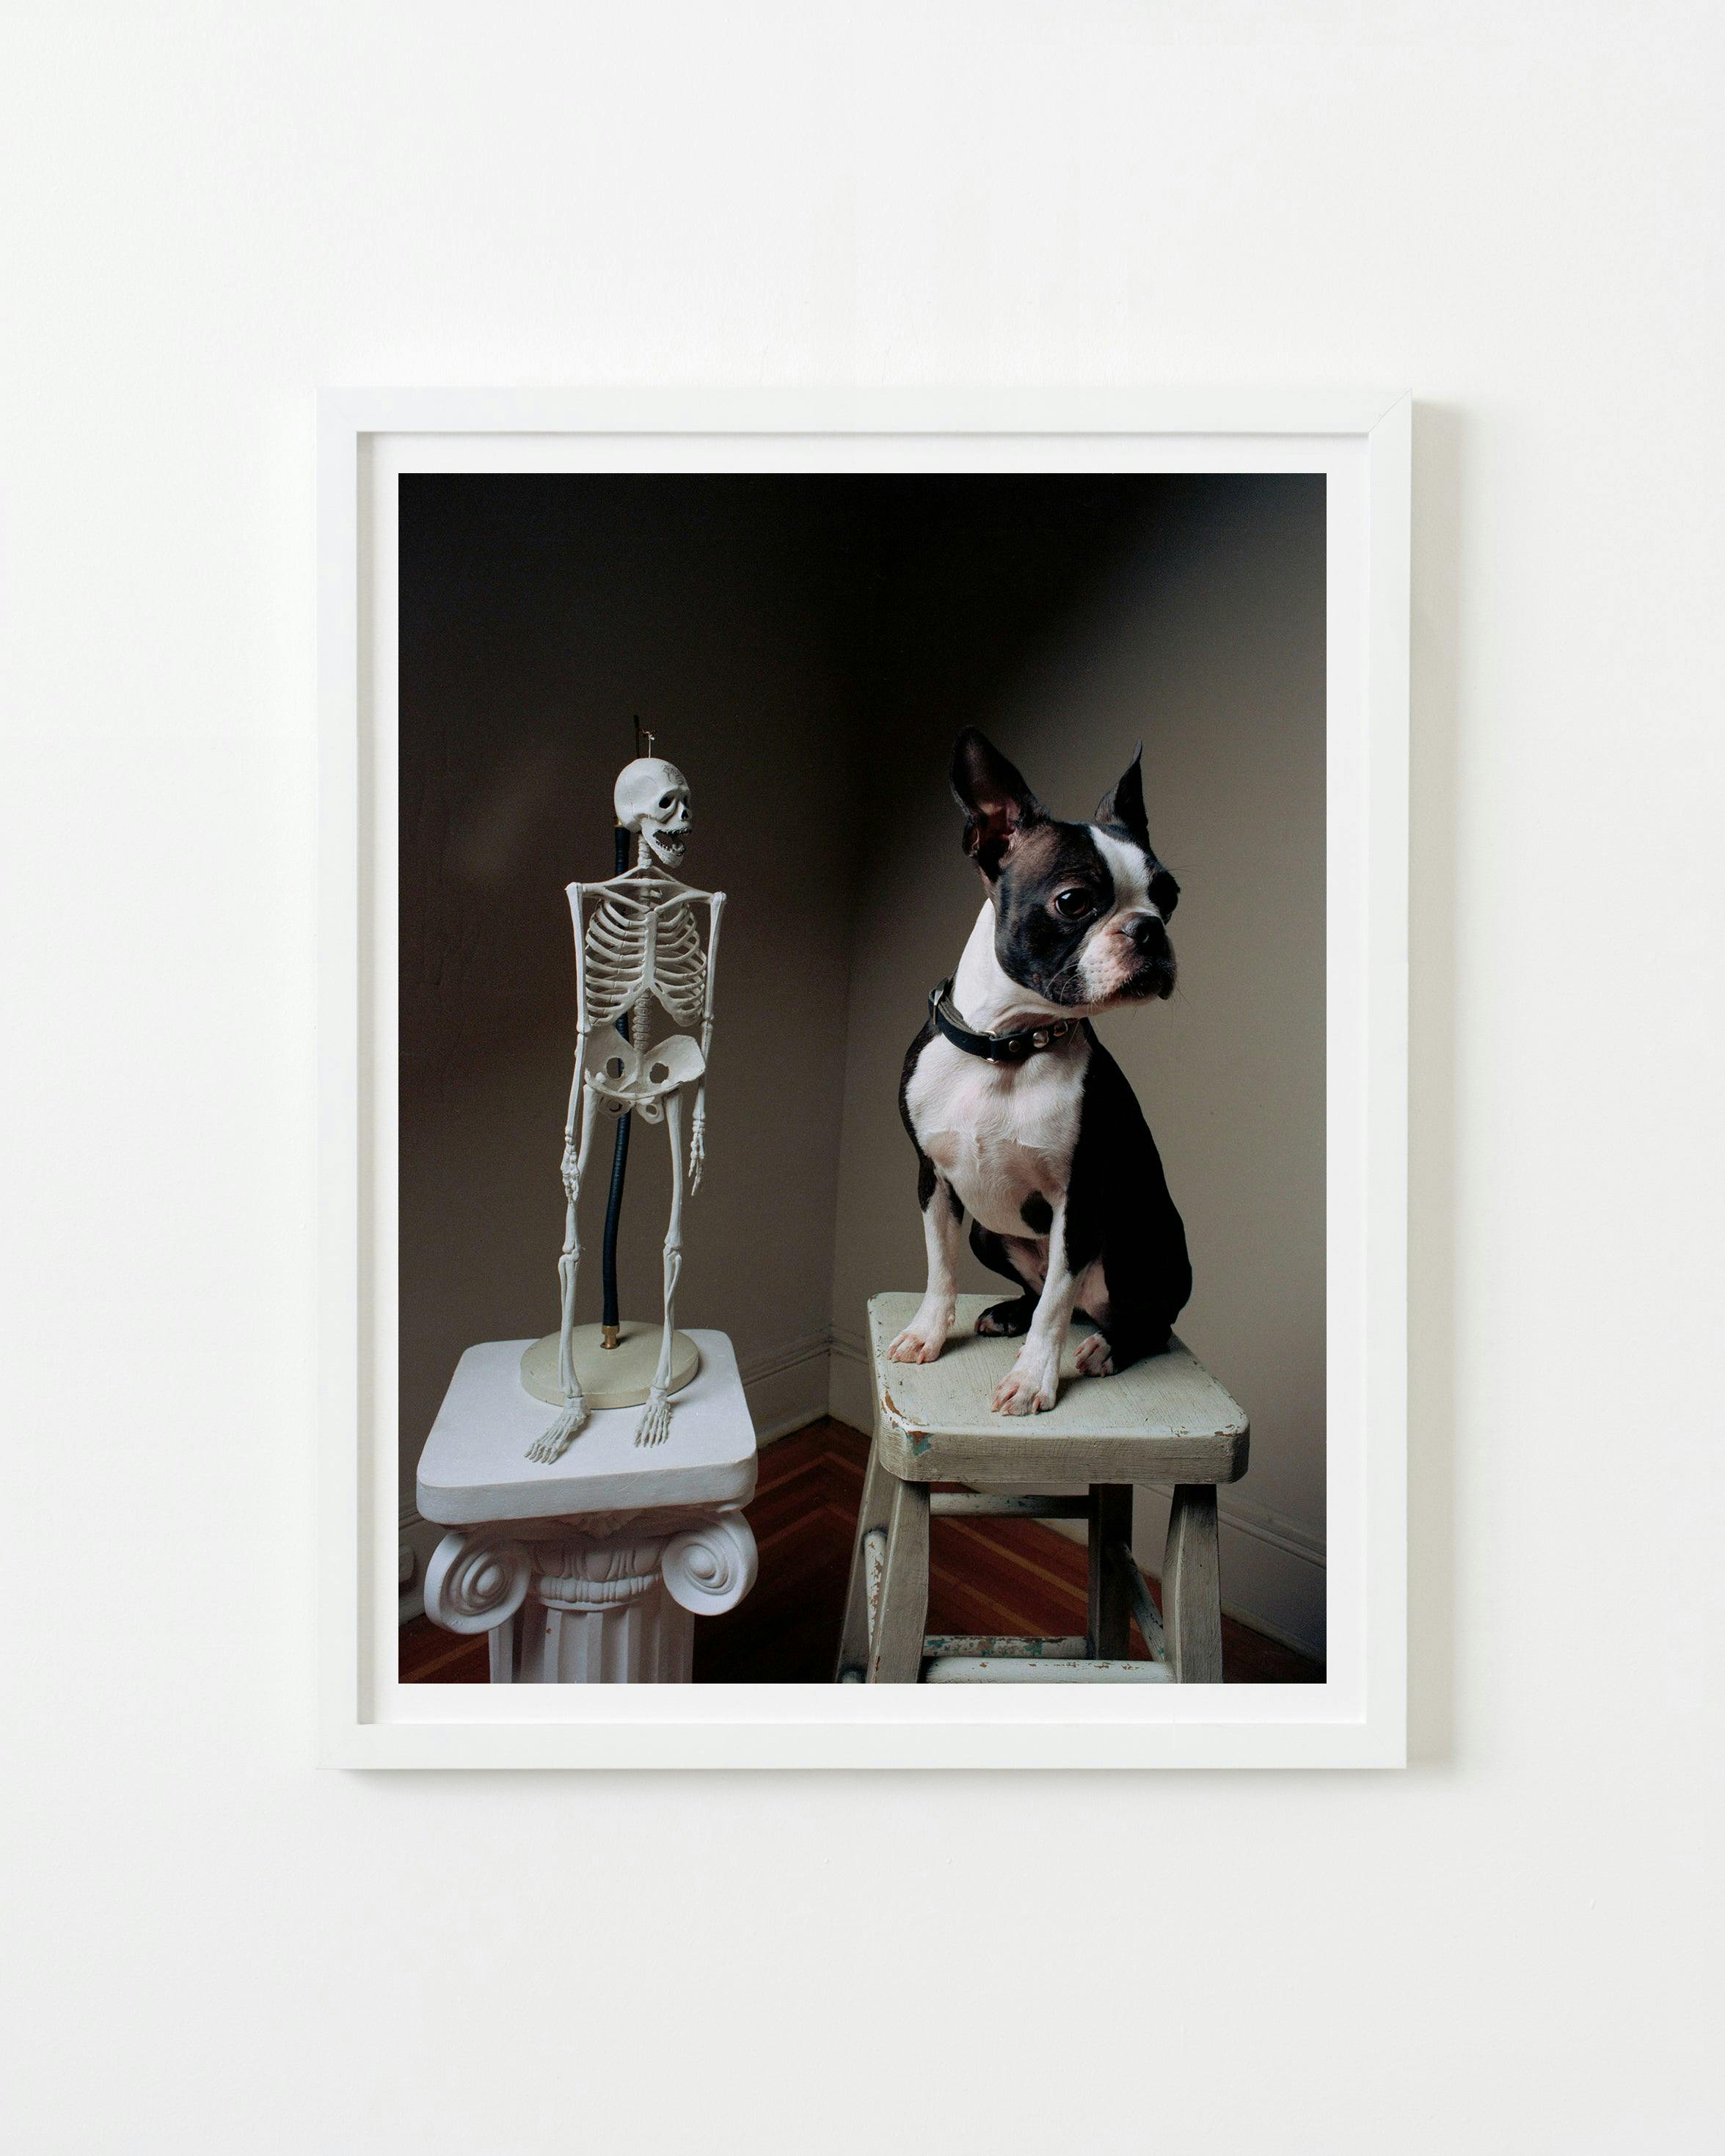 Photography by Michael Northrup titled "Sid with Skeleton".